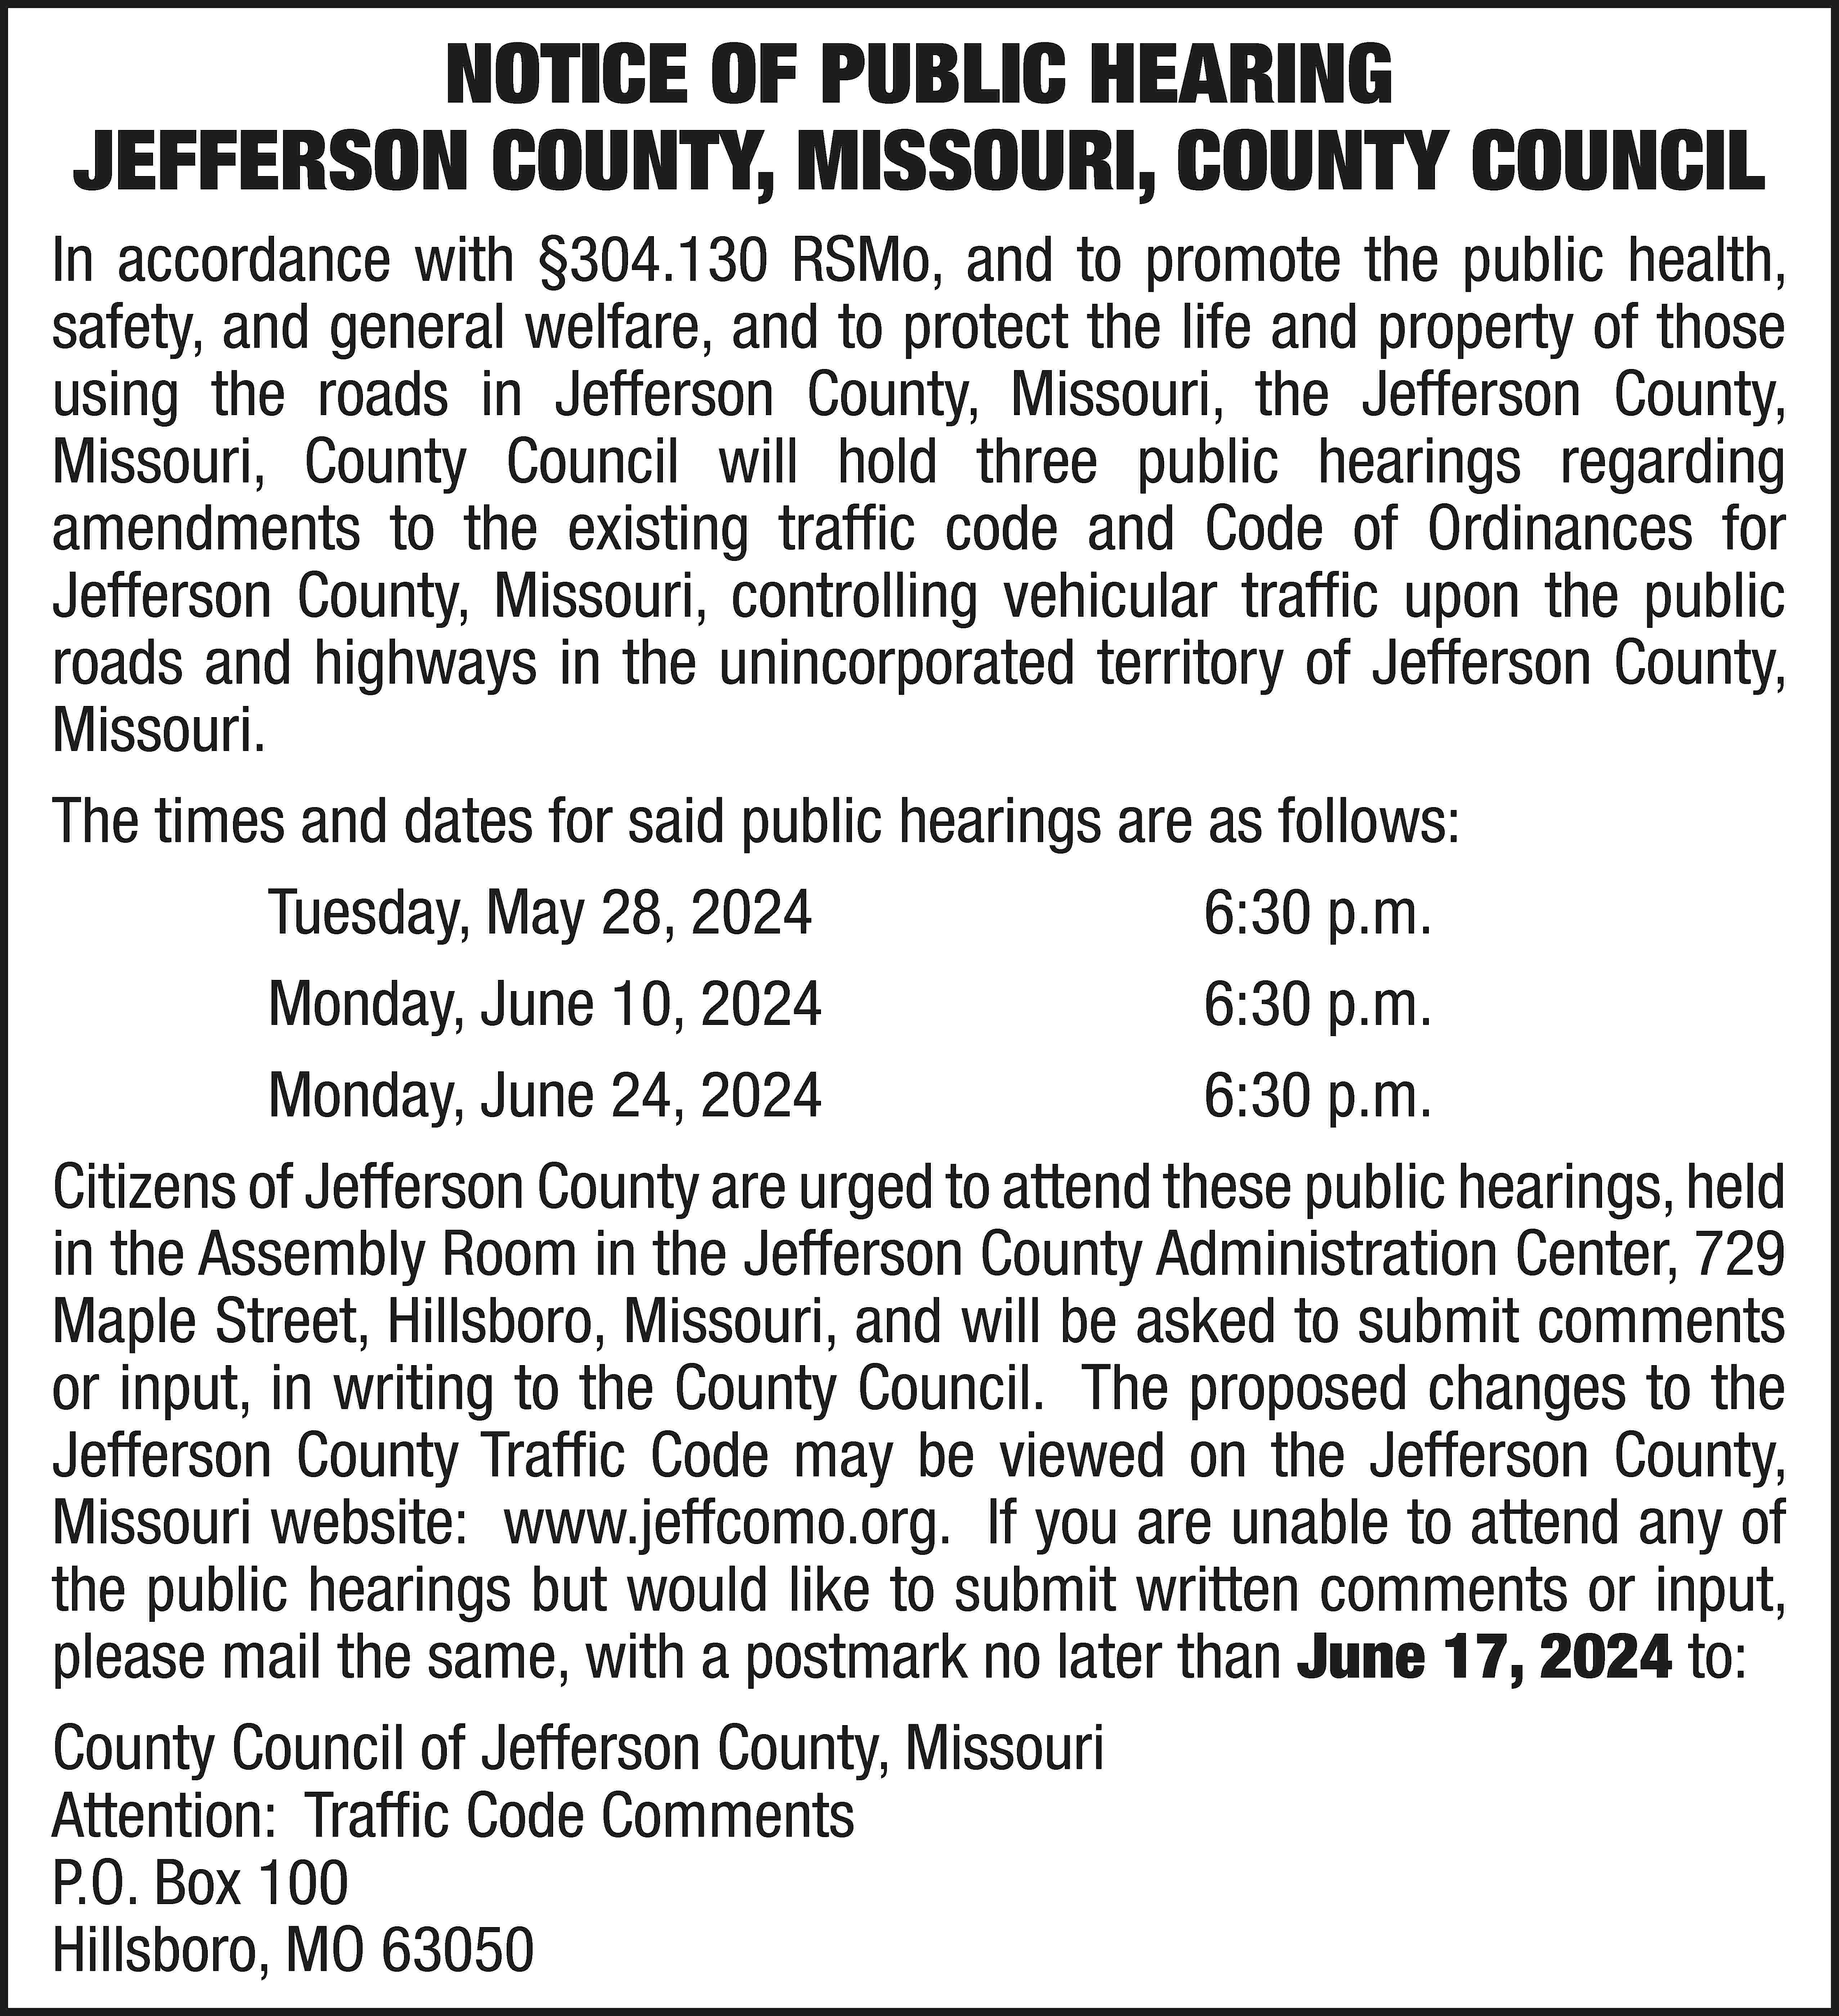 NOTICE OF PUBLIC HEARING JEFFERSON  NOTICE OF PUBLIC HEARING JEFFERSON COUNTY, MISSOURI, COUNTY COUNCIL In accordance with §304.130 RSMo, and to promote the public health, safety, and general welfare, and to protect the life and property of those using the roads in Jefferson County, Missouri, the Jefferson County, Missouri, County Council will hold three public hearings regarding amendments to the existing traffic code and Code of Ordinances for Jefferson County, Missouri, controlling vehicular traffic upon the public roads and highways in the unincorporated territory of Jefferson County, Missouri. The times and dates for said public hearings are as follows: 	 Tuesday, May 28, 2024		 6:30 p.m. 	 Monday, June 10, 2024		 6:30 p.m. 	 Monday, June 24, 2024		 6:30 p.m. Citizens of Jefferson County are urged to attend these public hearings, held in the Assembly Room in the Jefferson County Administration Center, 729 Maple Street, Hillsboro, Missouri, and will be asked to submit comments or input, in writing to the County Council. The proposed changes to the Jefferson County Traffic Code may be viewed on the Jefferson County, Missouri website: www.jeffcomo.org. If you are unable to attend any of the public hearings but would like to submit written comments or input, please mail the same, with a postmark no later than June 17, 2024 to: County Council of Jefferson County, Missouri Attention: Traffic Code Comments P.O. Box 100 Hillsboro, MO 63050